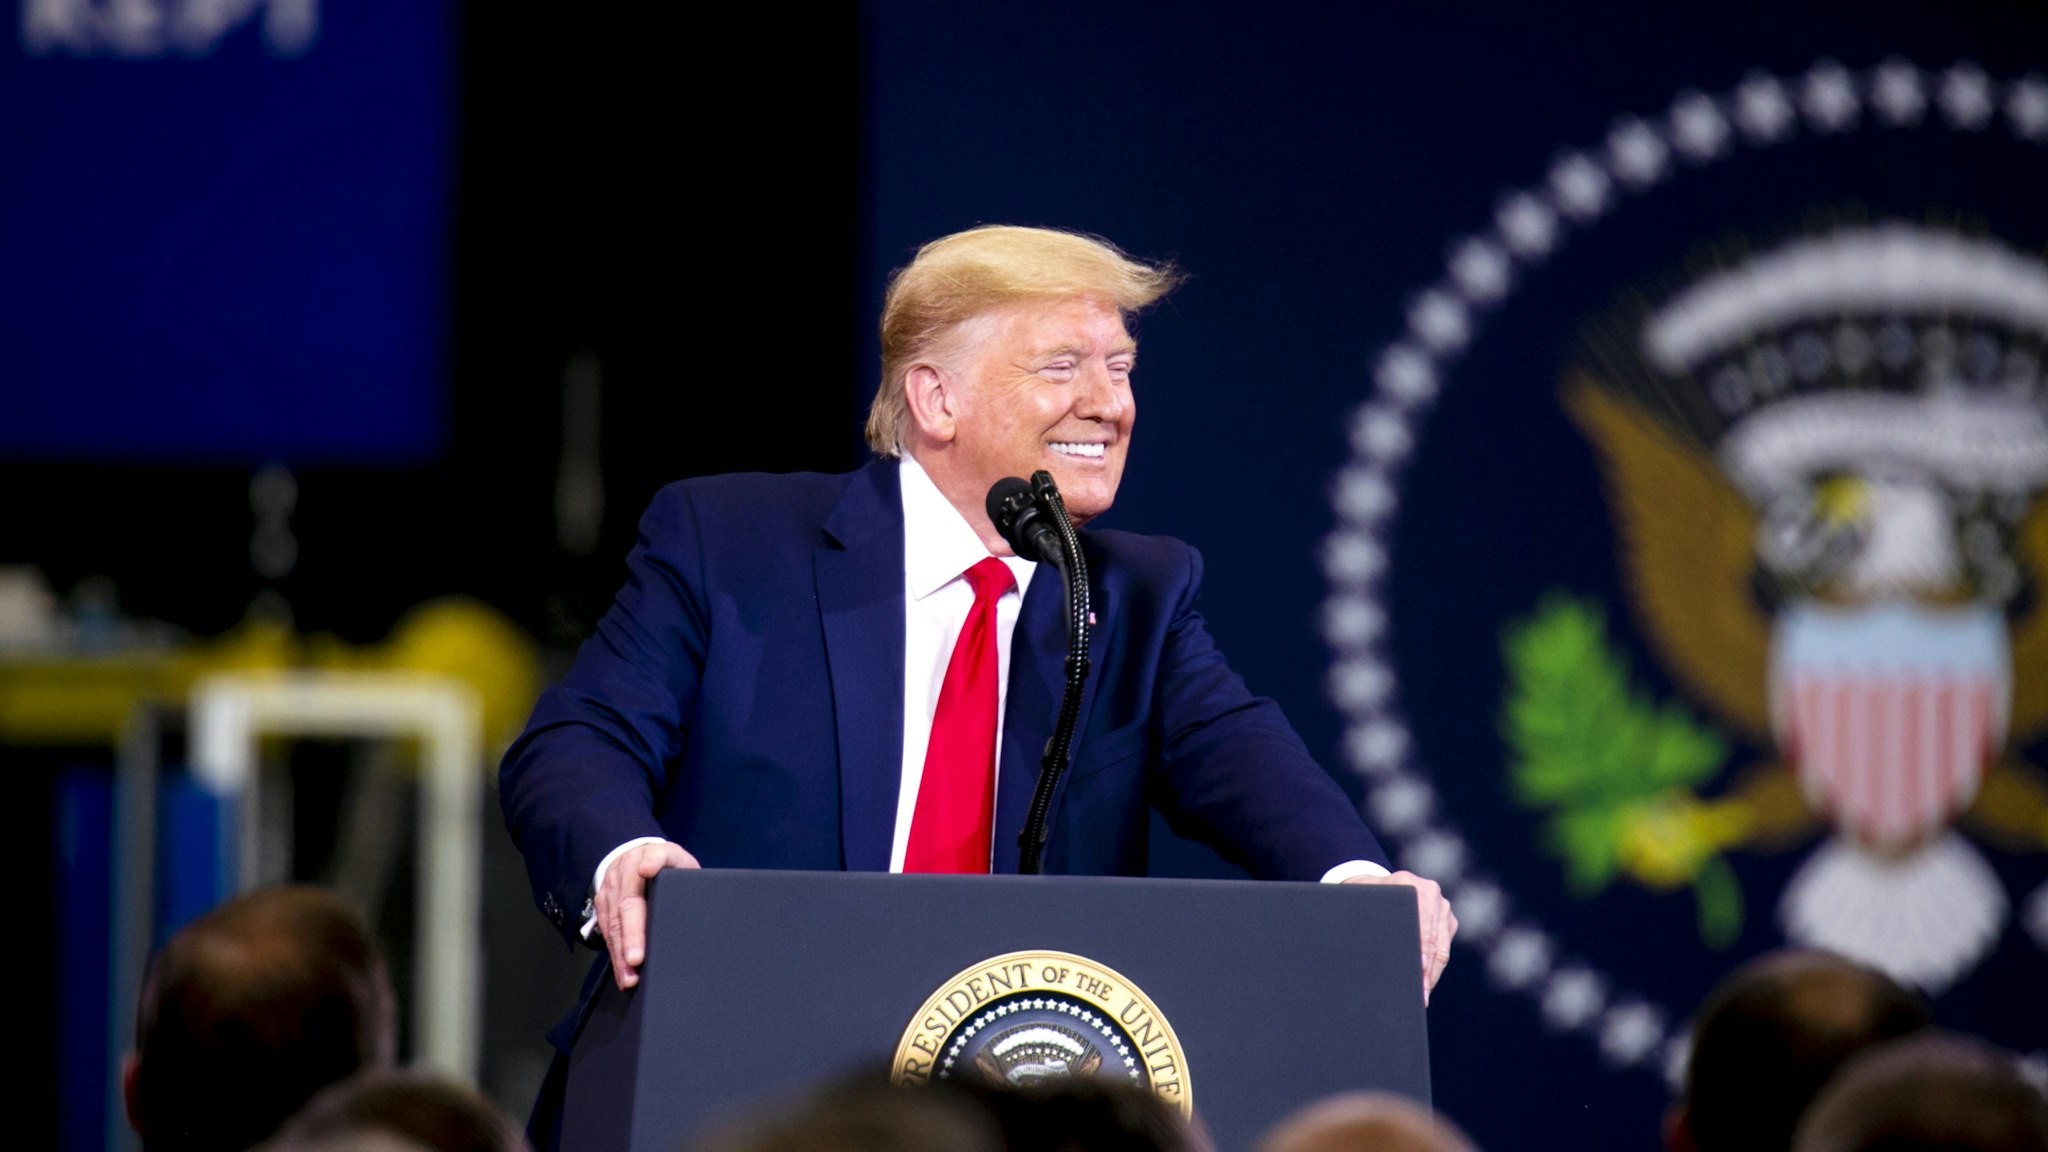 U.S. President Donald Trump smiles while speaking during a visit to a Dana Inc. manufacturing facility in Warren, Michigan, U.S., on Thursday, Jan. 30, 2020. Trump is traveling Thursday to Michigan and Iowa -- where he's expected to tout the new U.S.-Mexico-Canada Agreement (USMCA) trade pact just as Democrats try to win over voters in next weeks Iowa caucuses.